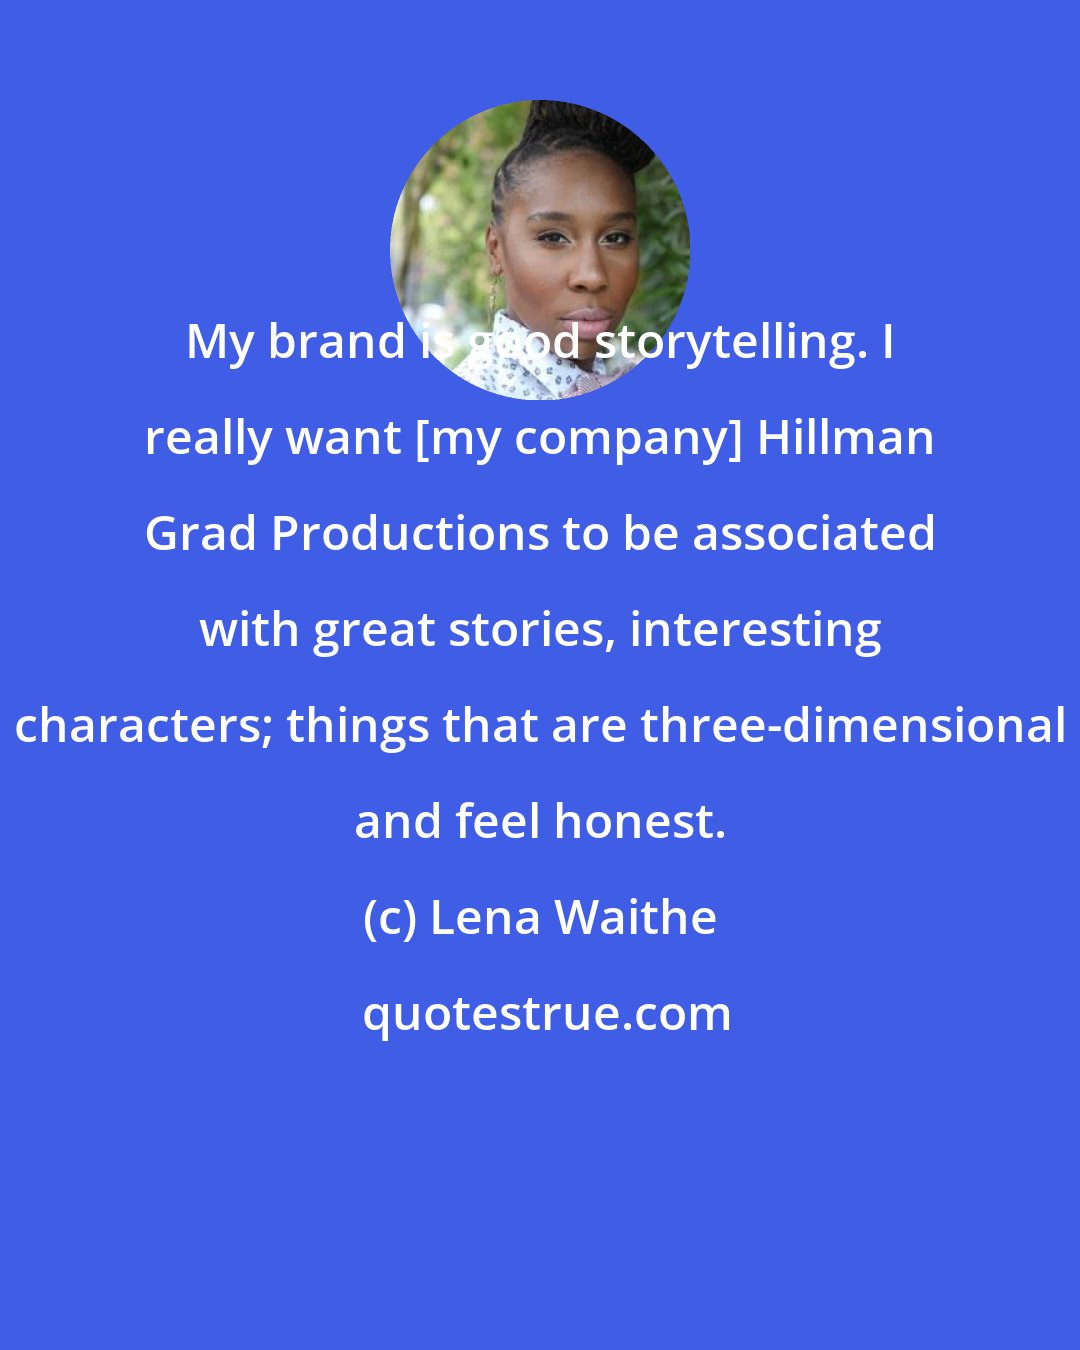 Lena Waithe: My brand is good storytelling. I really want [my company] Hillman Grad Productions to be associated with great stories, interesting characters; things that are three-dimensional and feel honest.